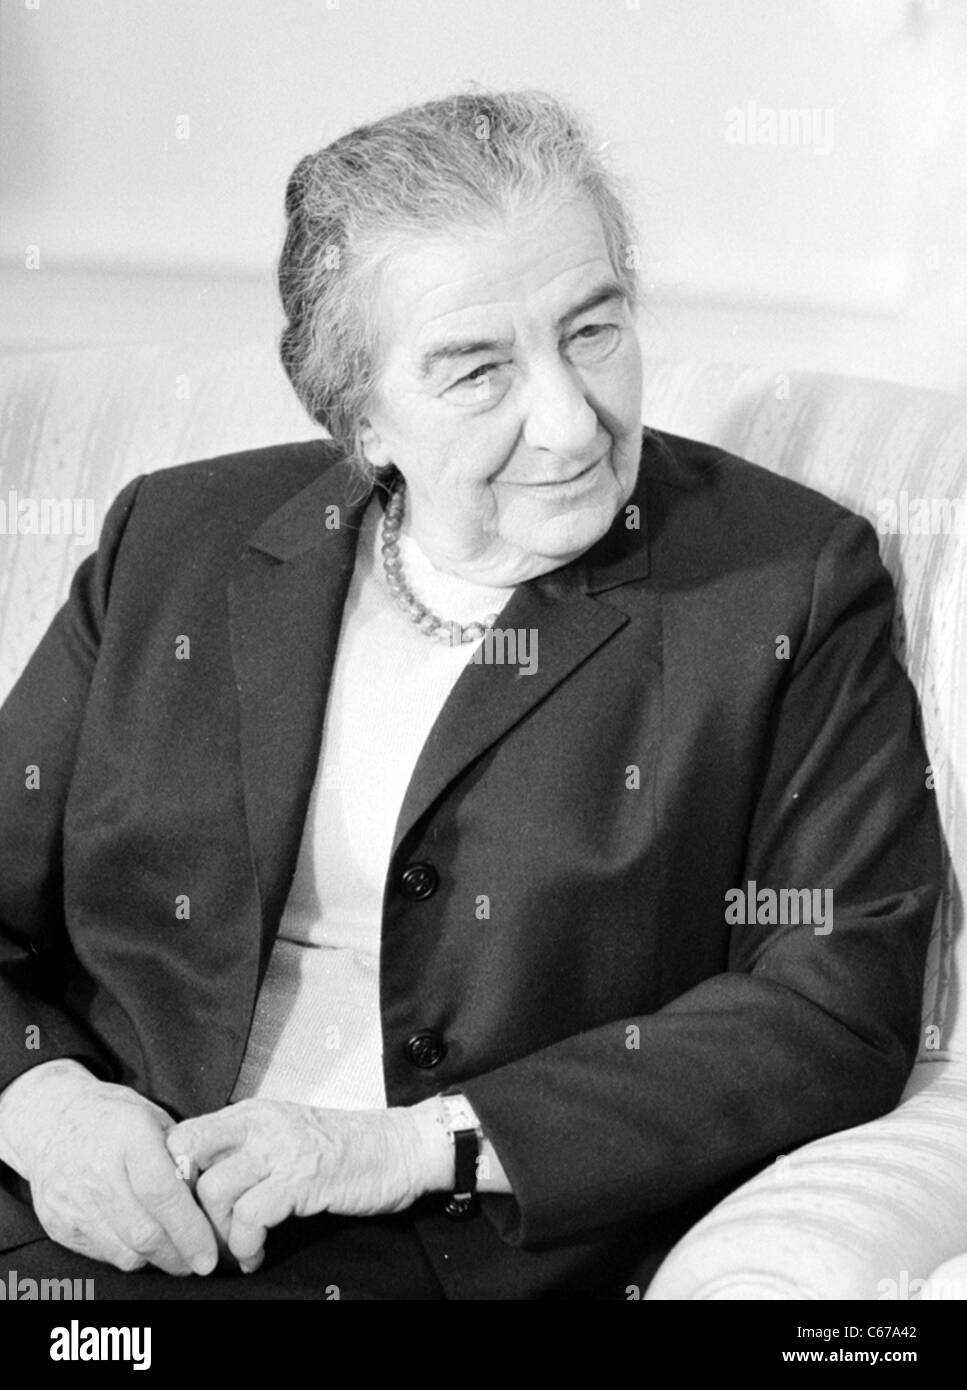 Golda Meir, earlier Golda Meyerson, born Golda Mabovitch, the fourth Prime Minister of the State of Israel. Stock Photo